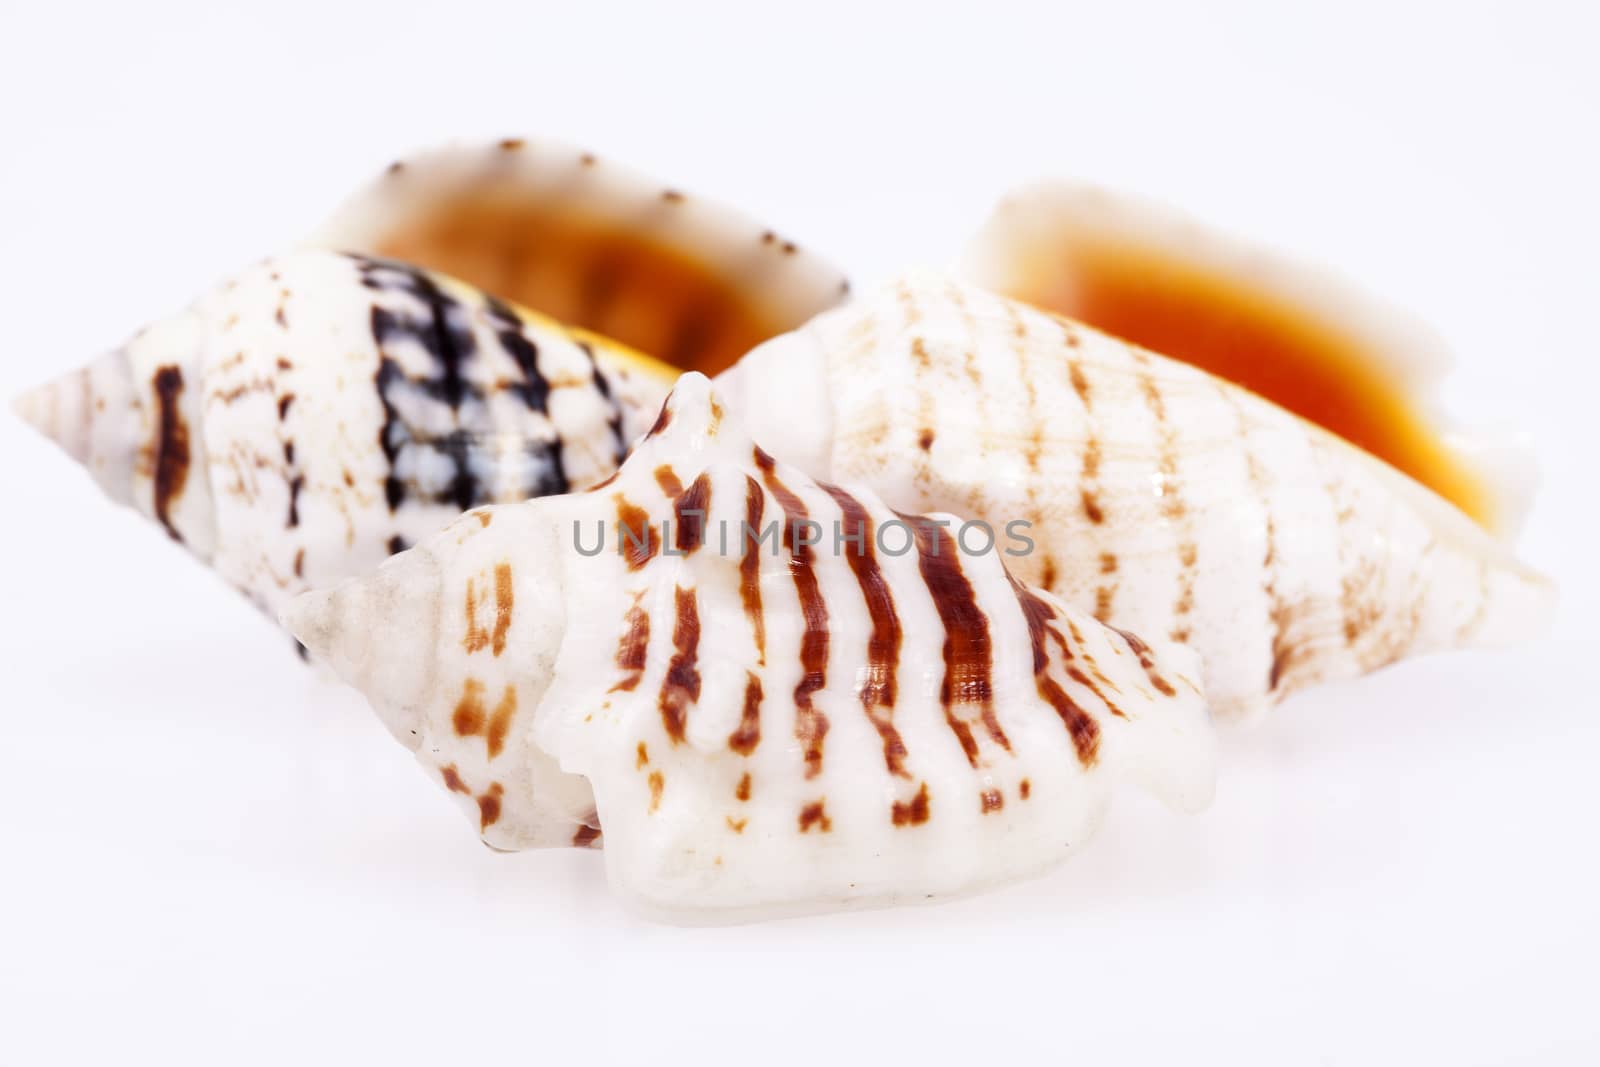 some sea shells isilated on white background by mychadre77